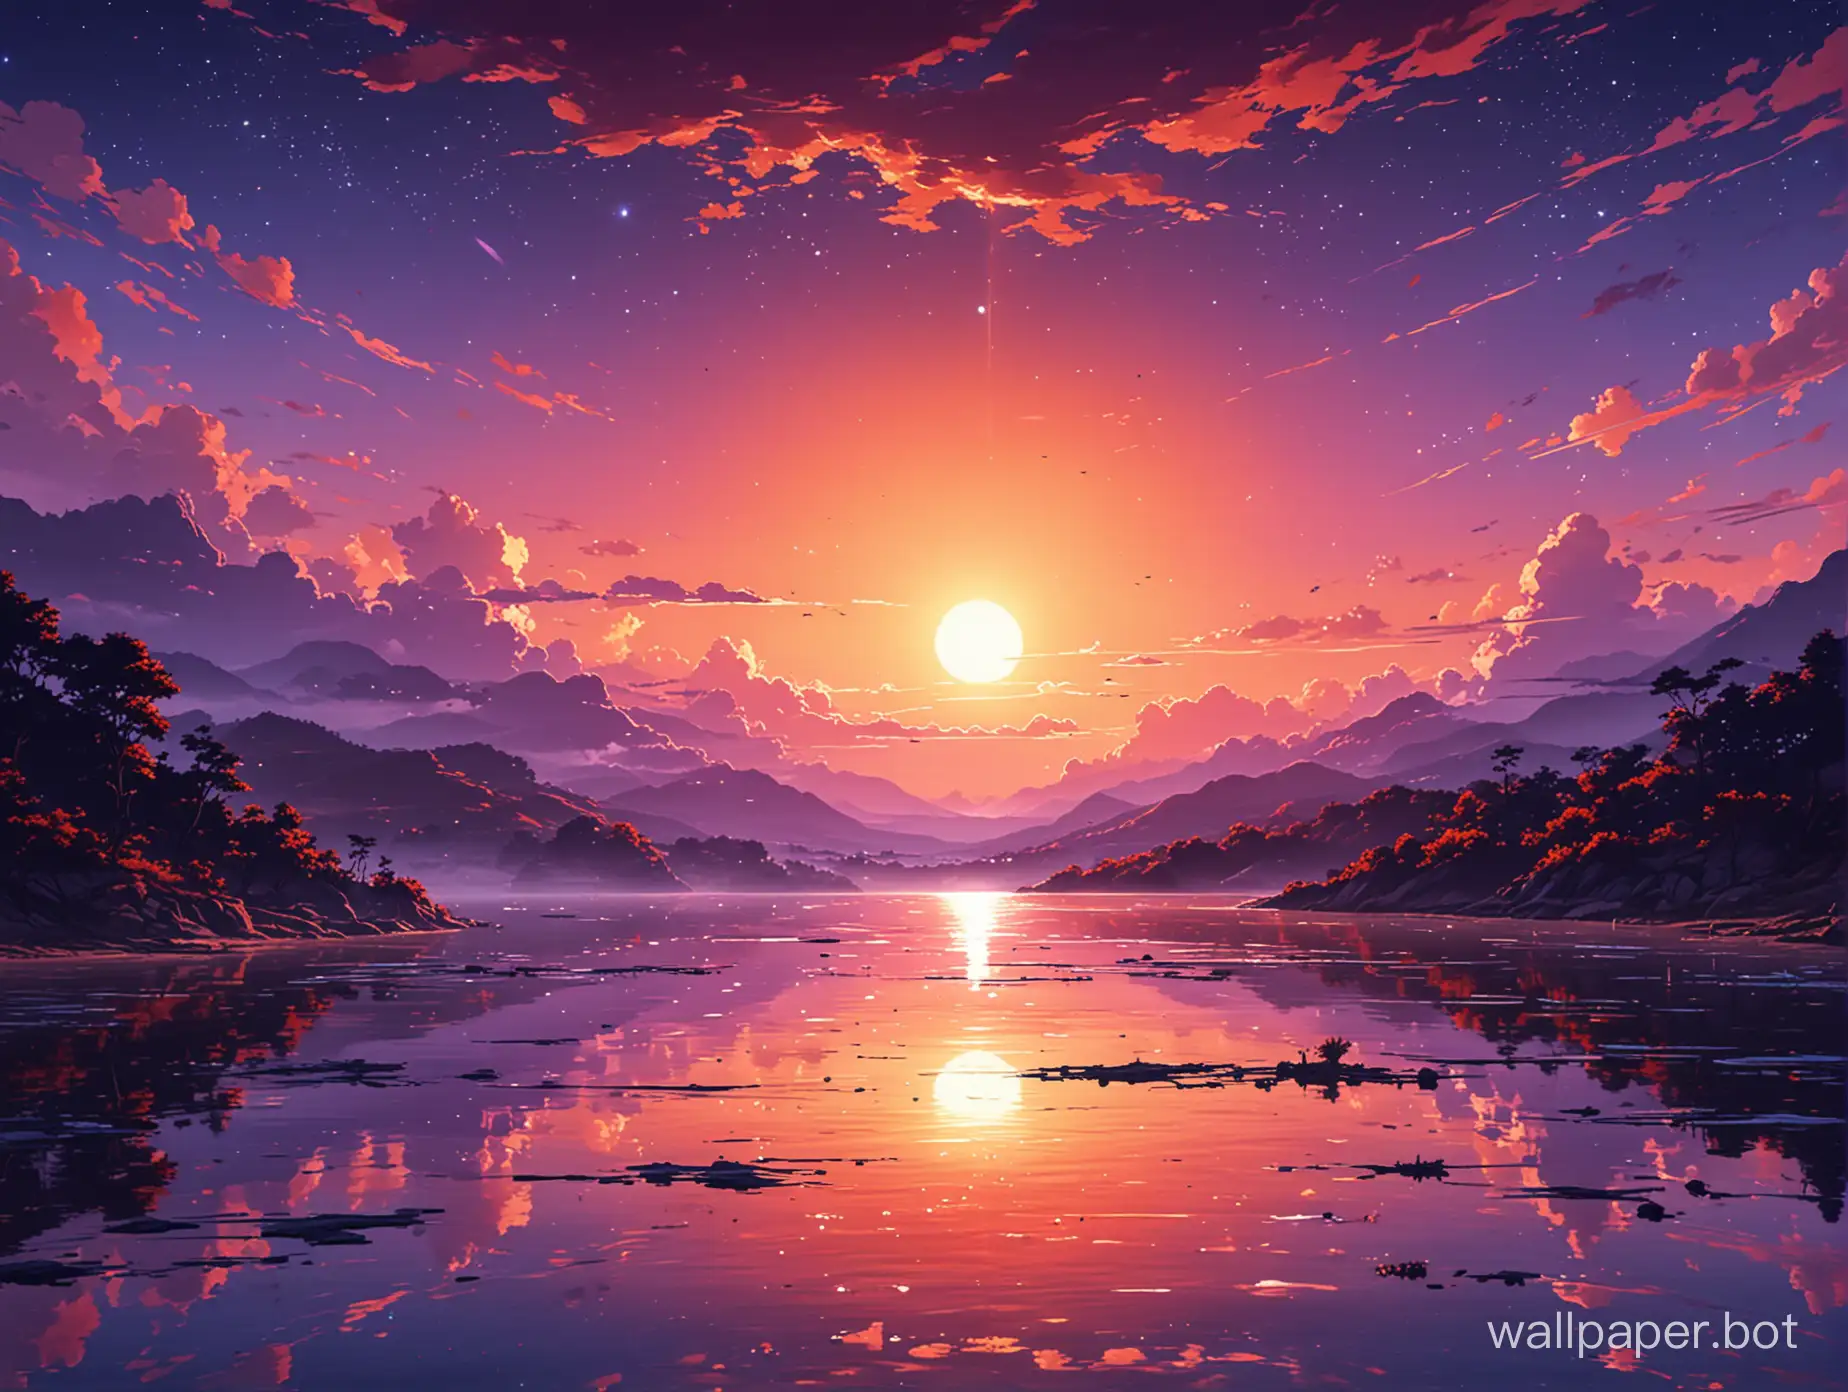 Vibrant-Anime-Sunset-Landscape-with-Water-Body-and-Starlit-Sky